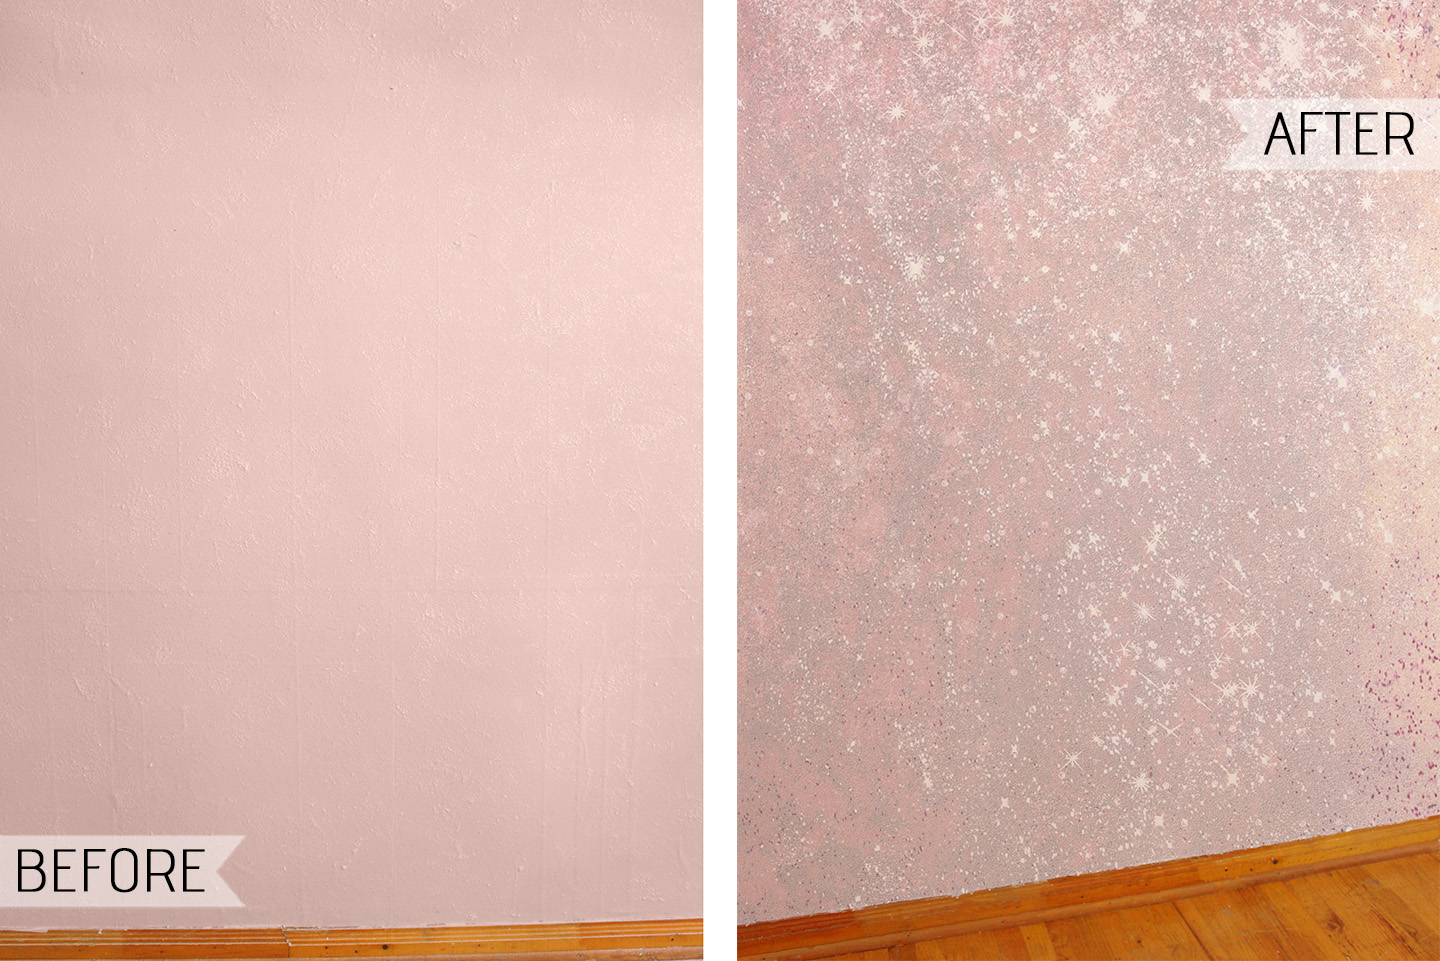 How to Apply Glitter Wall Paint - Dynamic Colors, Inc.